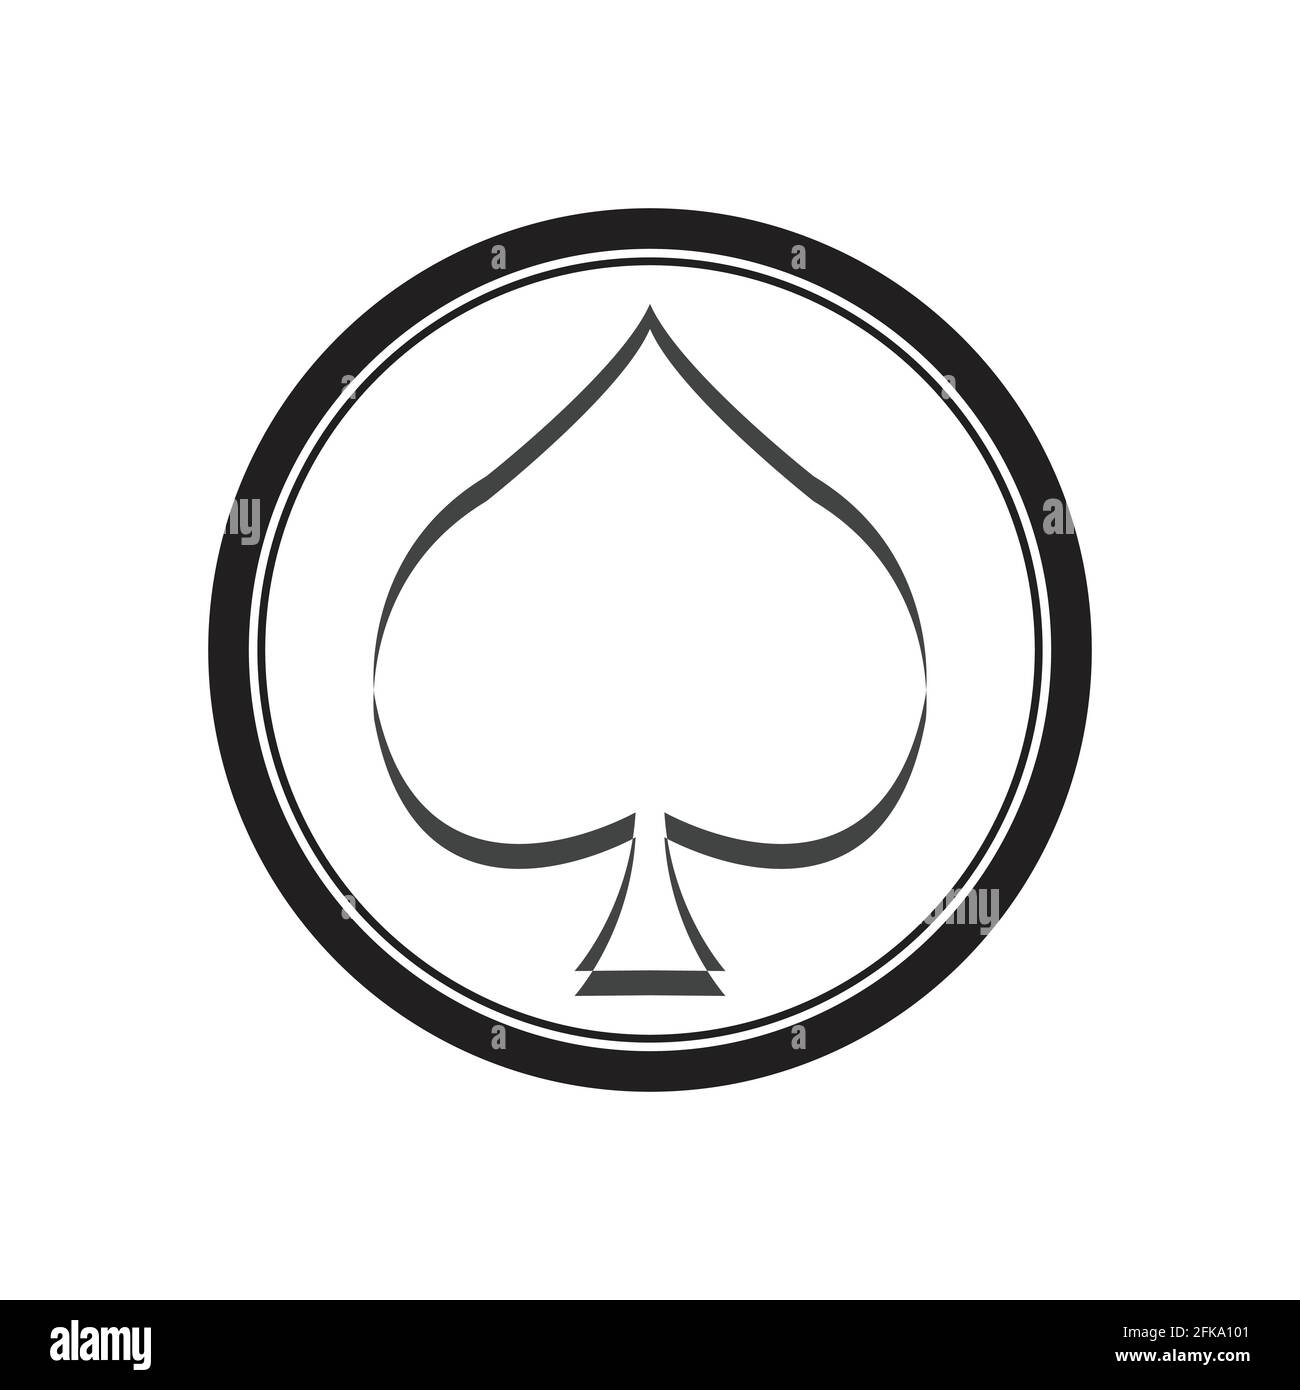 Ace Of Spades Logo Vector Art, Icons, and Graphics for Free Download